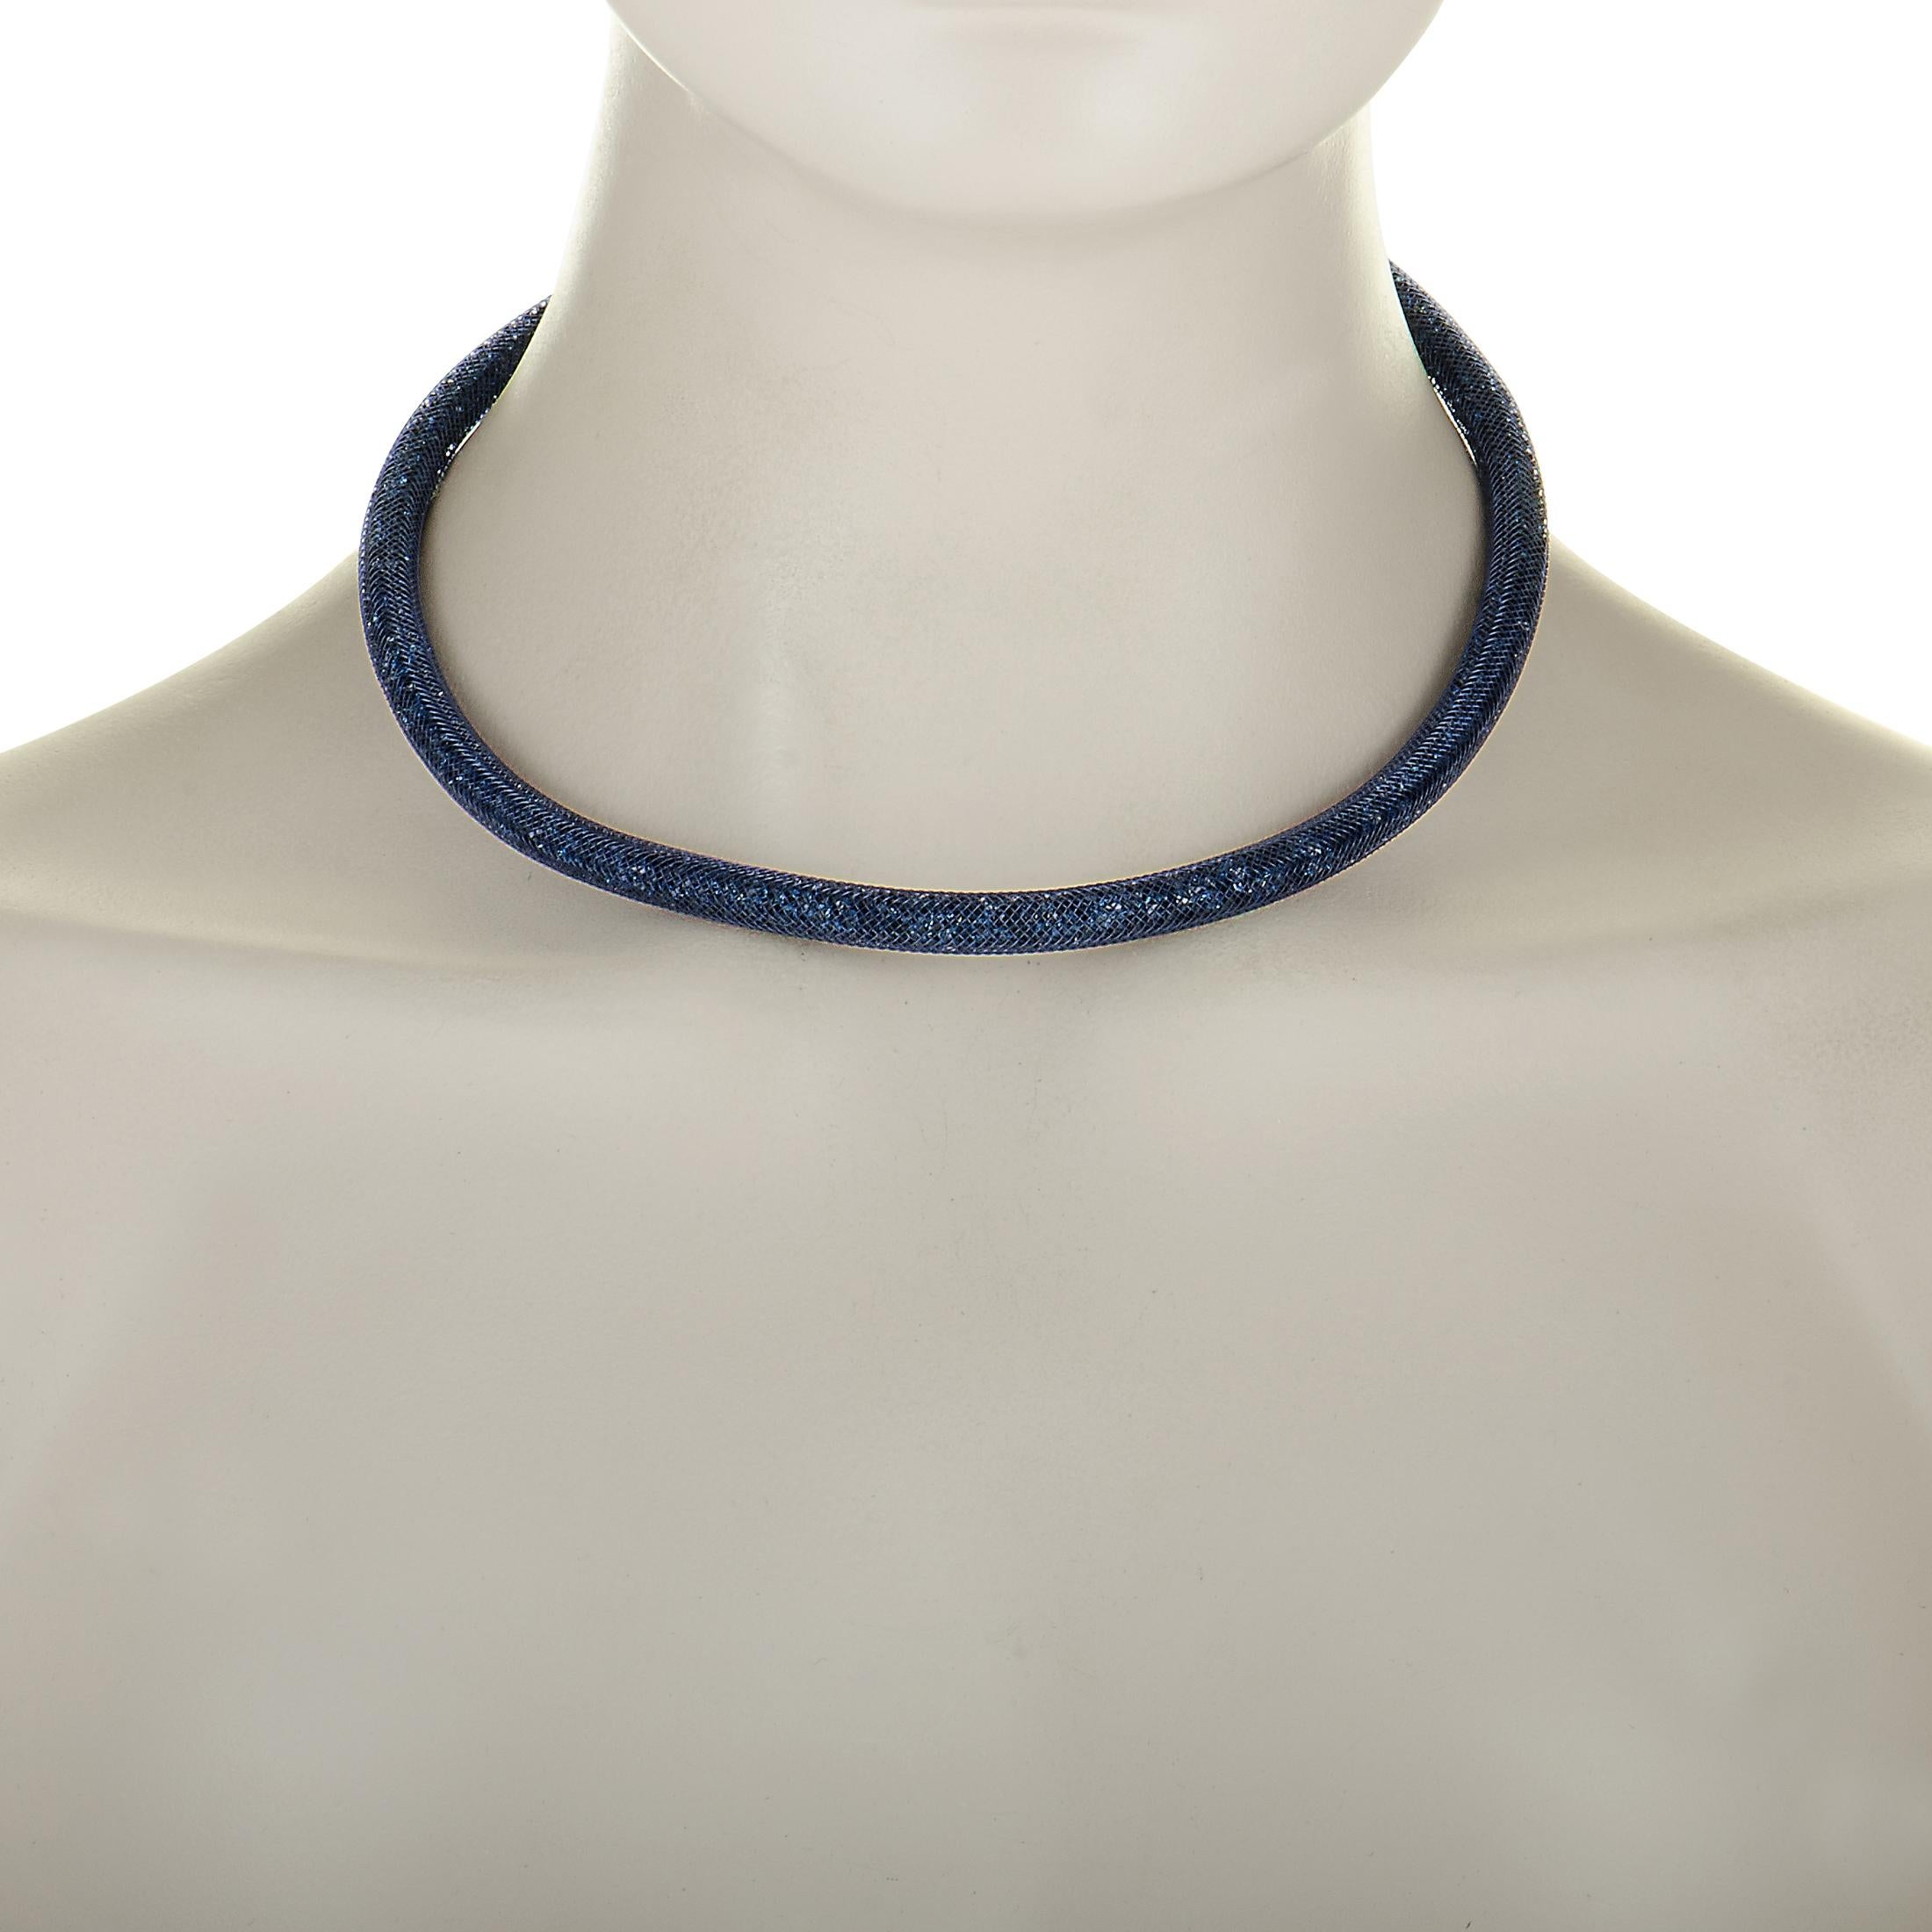 The Swarovski “Stardust” necklace is made out of palladium-plated stainless steel and fishnet tubes filled with blue crystals. The necklace weighs 36.7 grams and measures 15.00” in length.
 
 This item is offered in brand new condition and includes